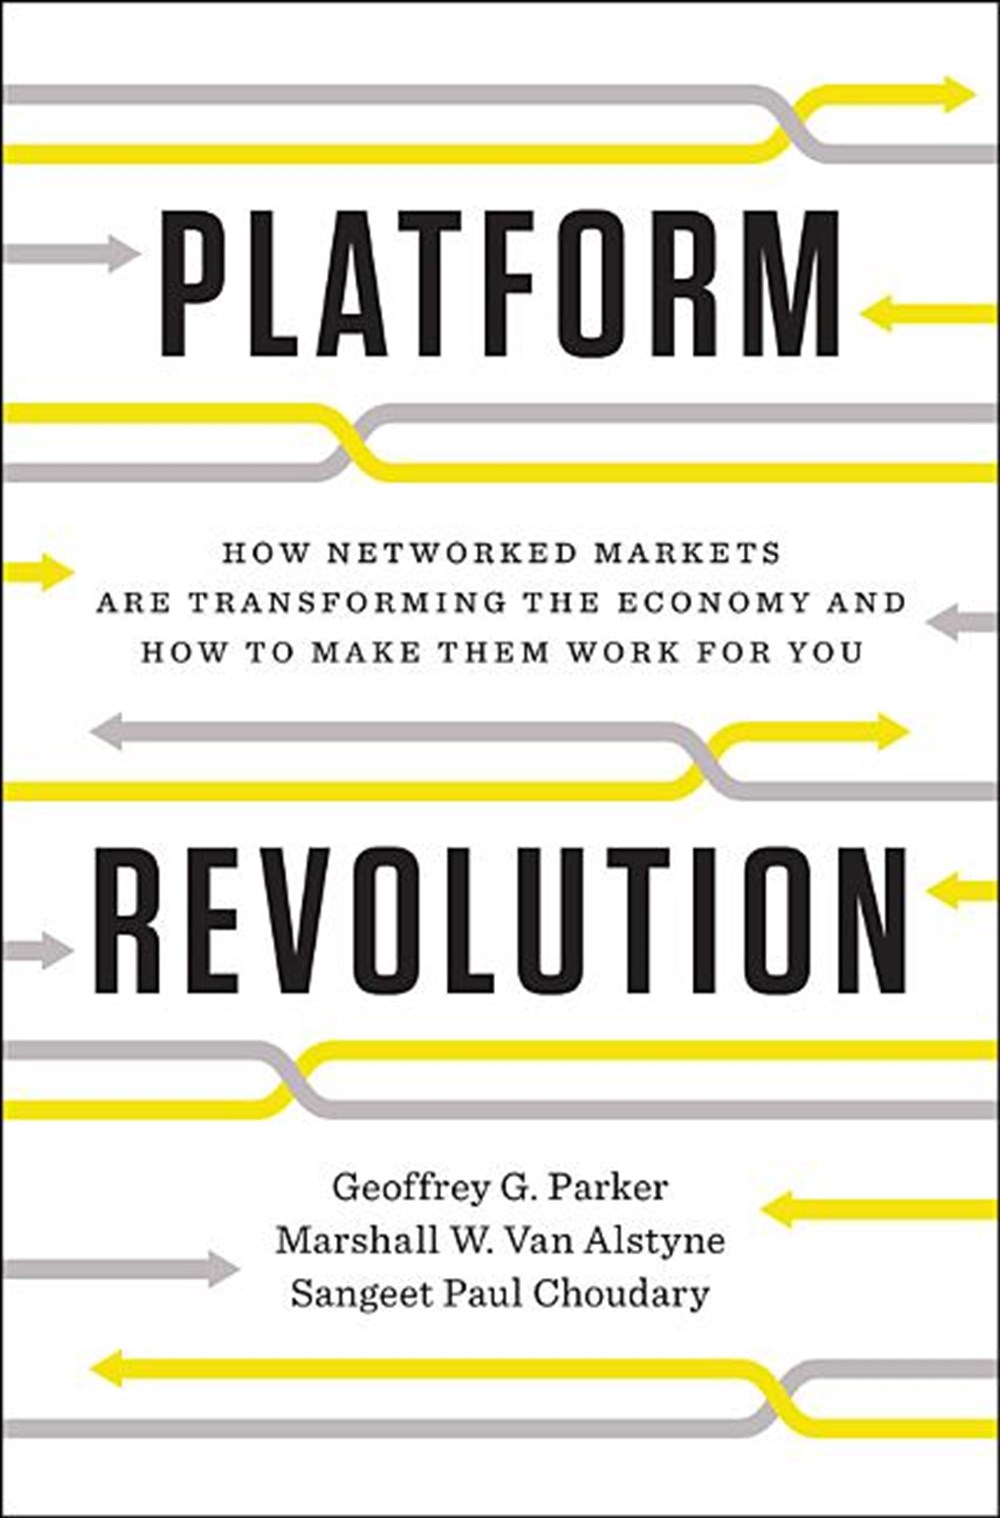 Platform Revolution How Networked Markets Are Transforming the Economy and How to Make Them Work for